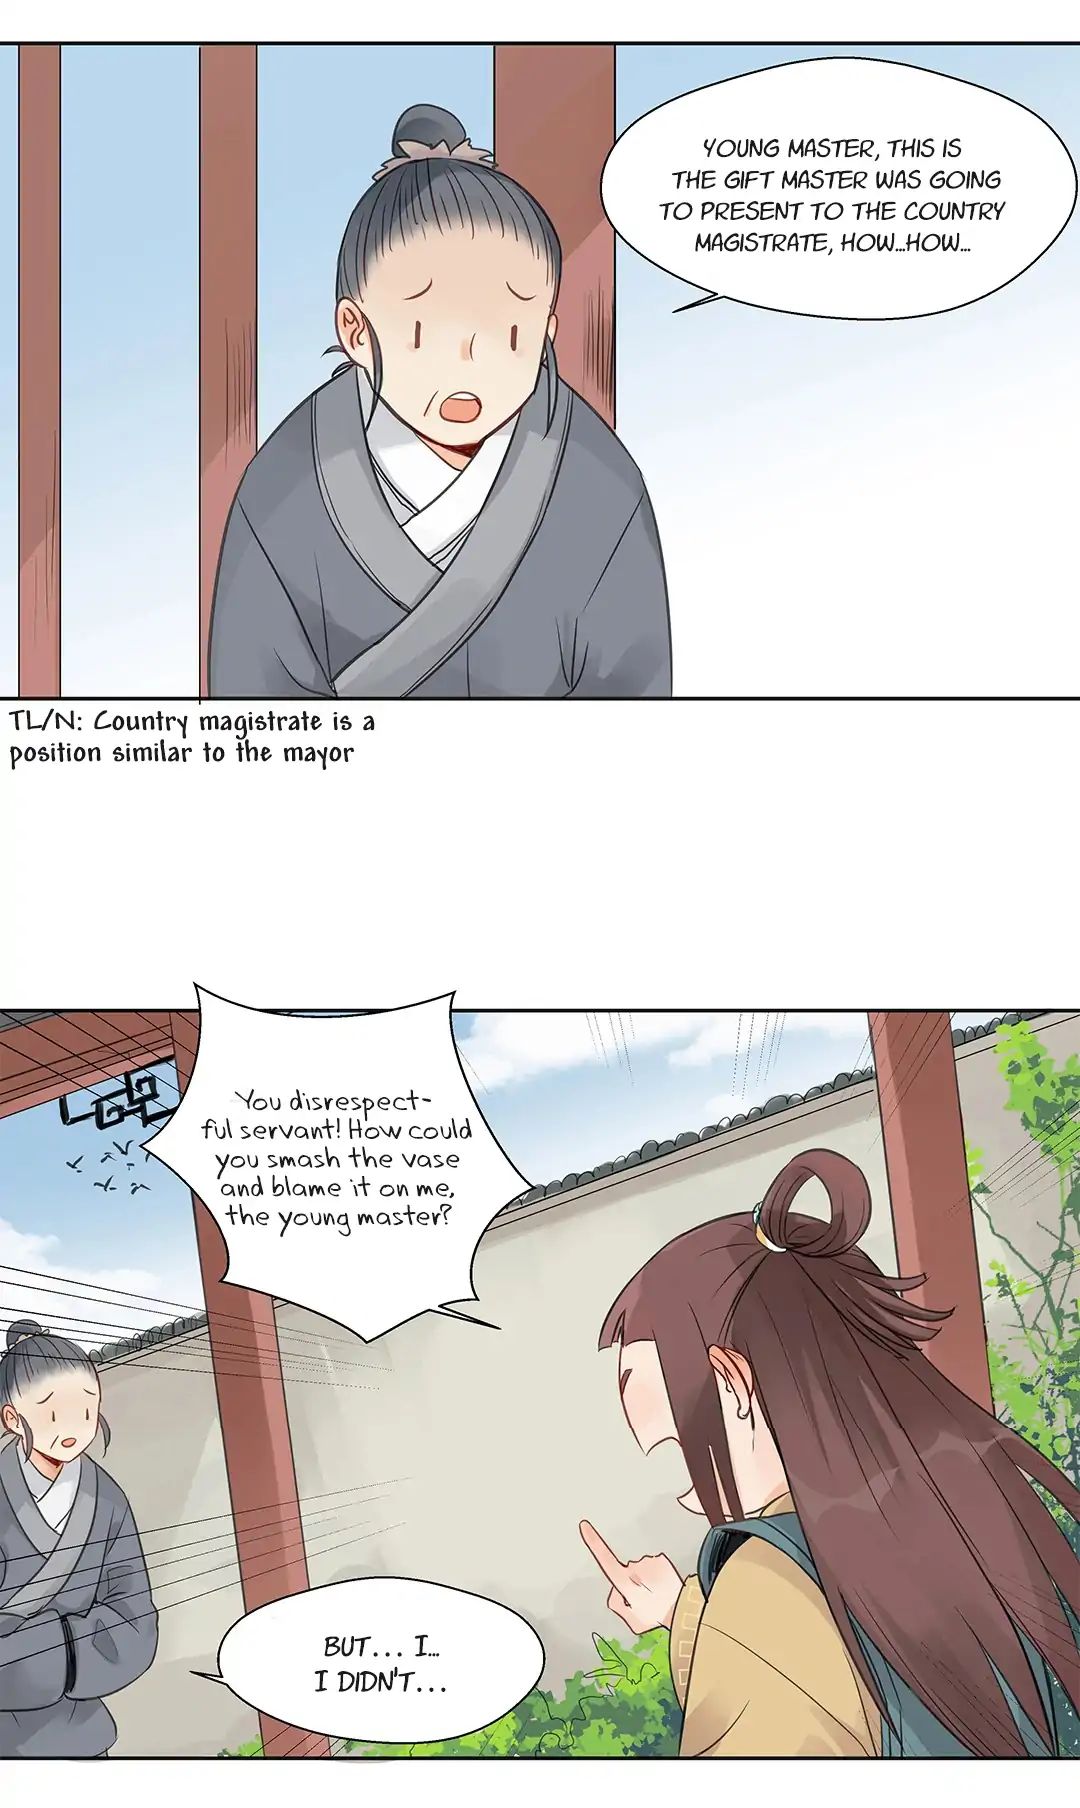 A Gust Of Wind Blows At Daybreak Chapter 2 Page 9